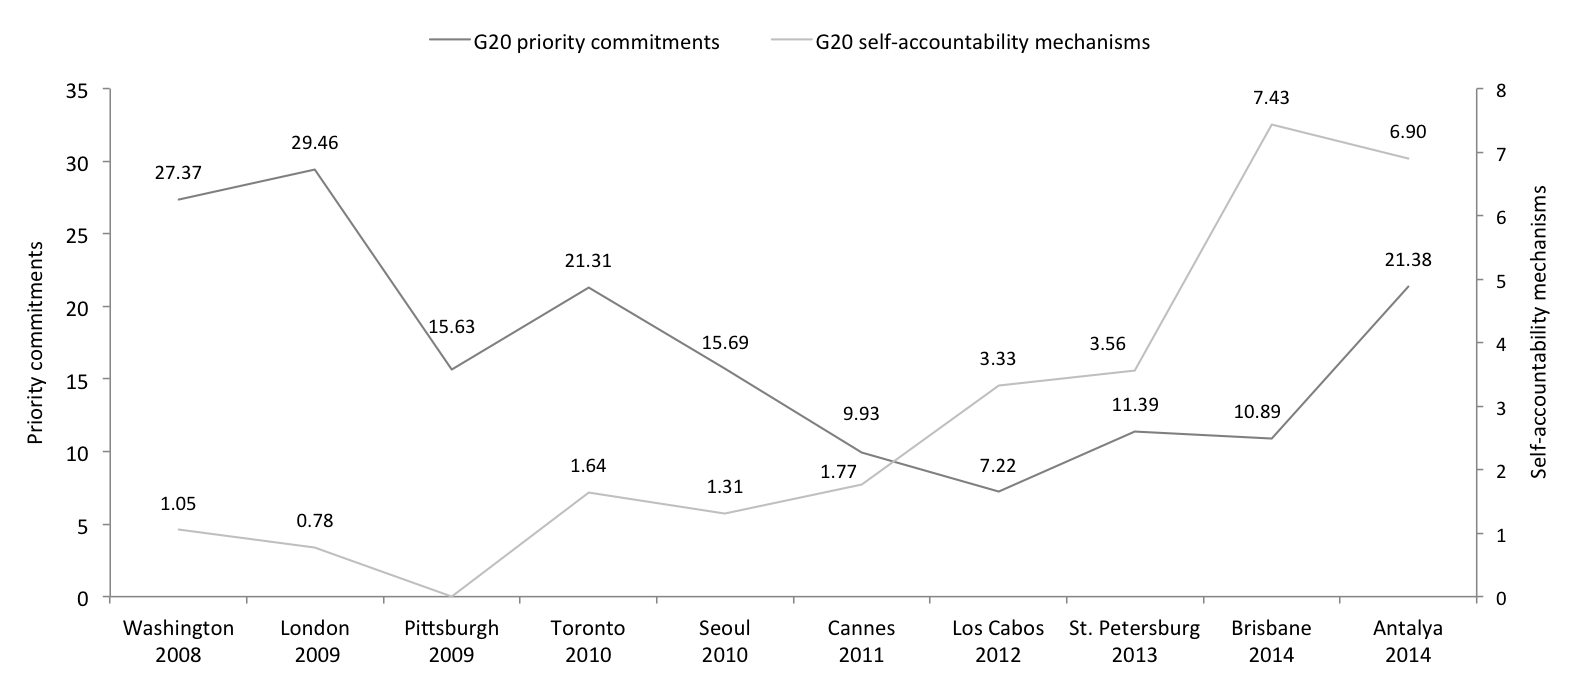 G20 Priority and Self-Accountability Commitments, 2008-2014